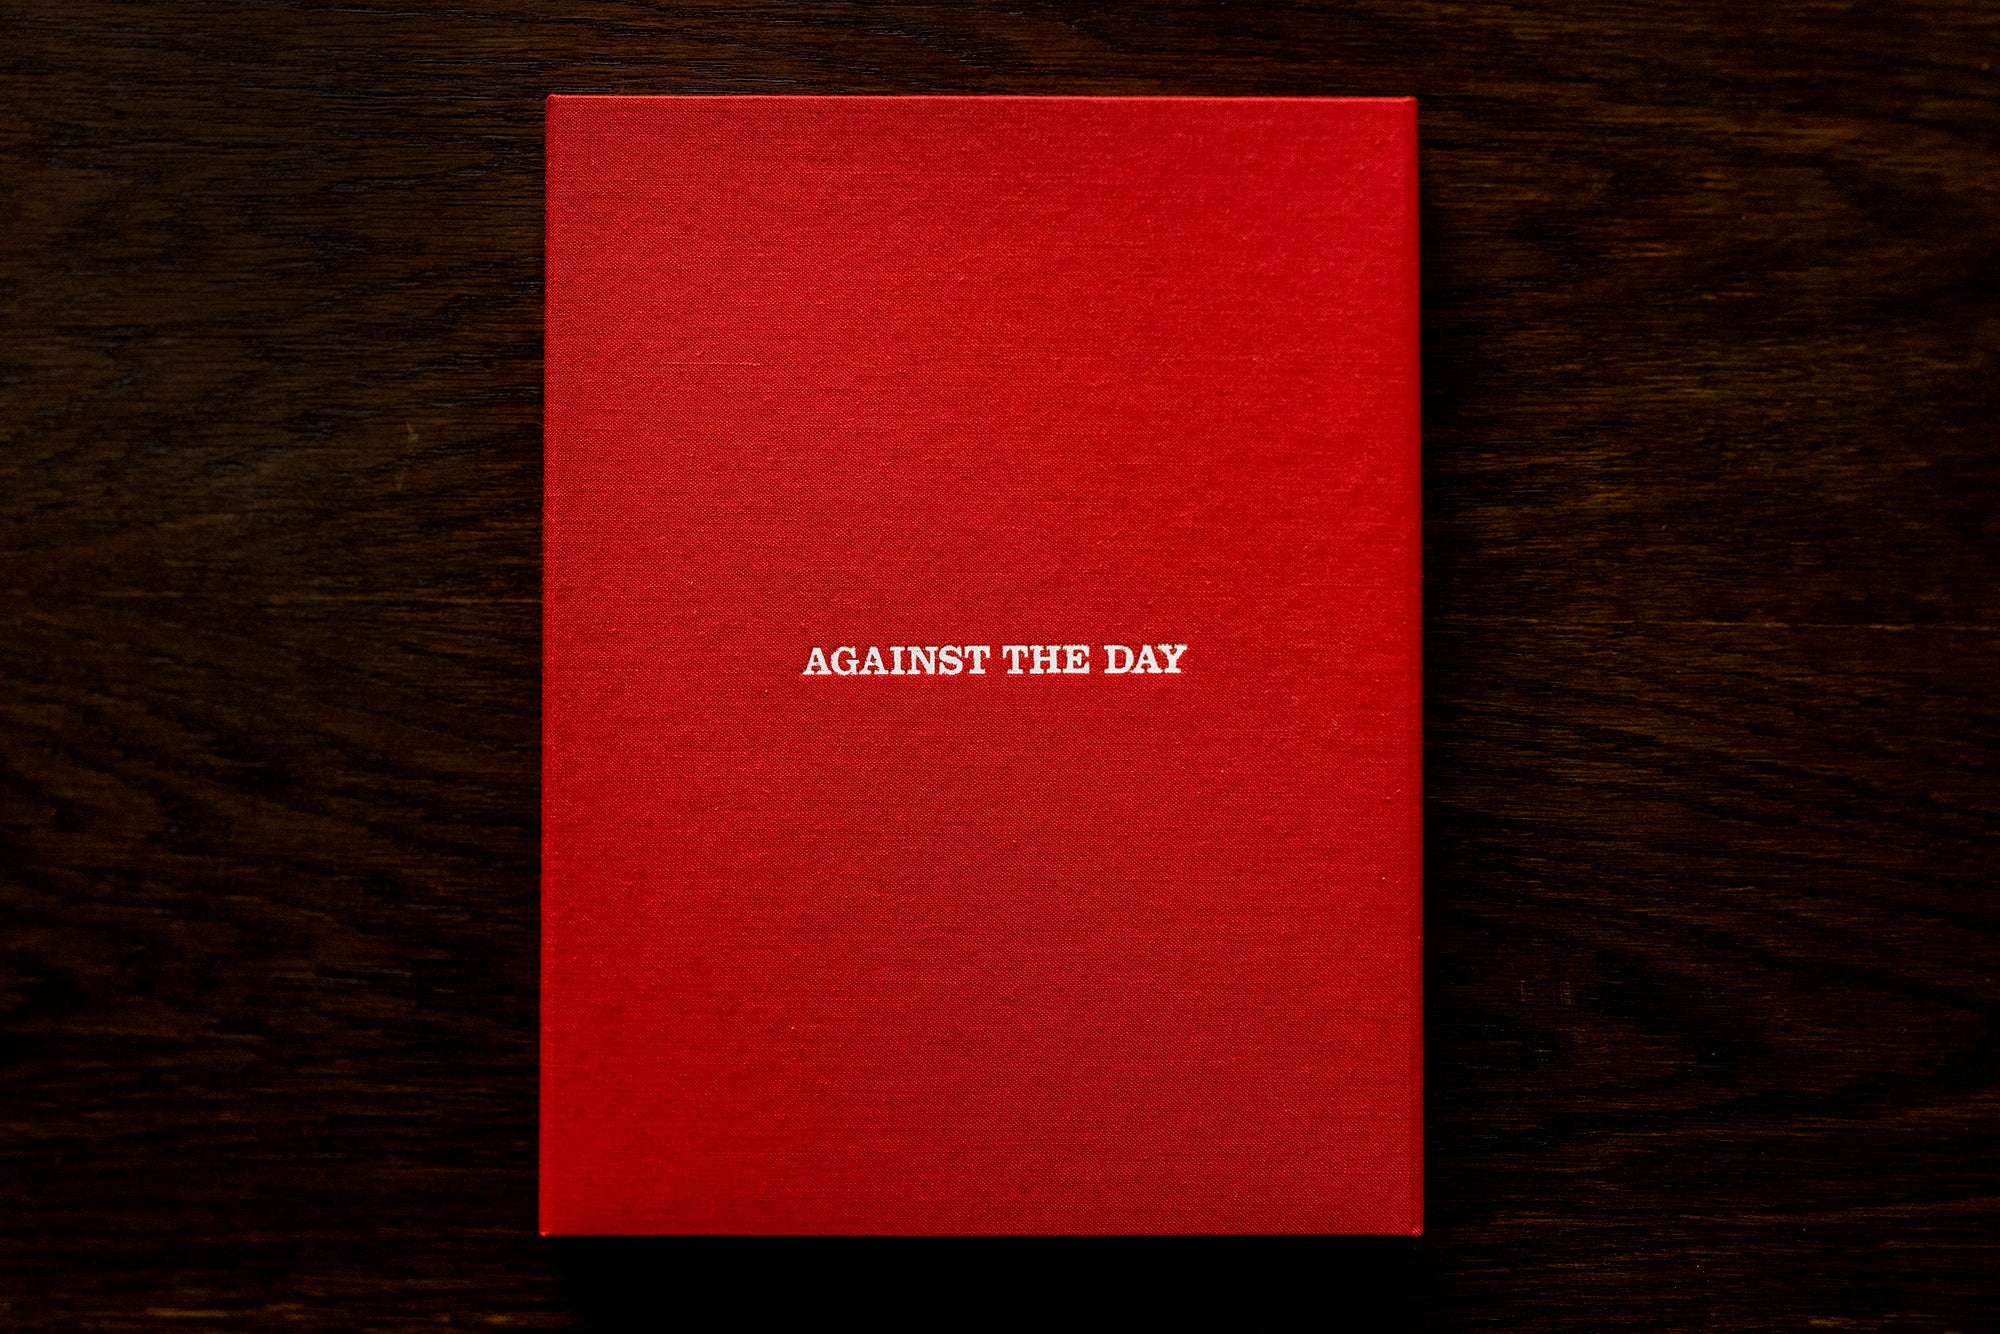 AGAINST THE DAY by António Júlio Duarte  Special Edition